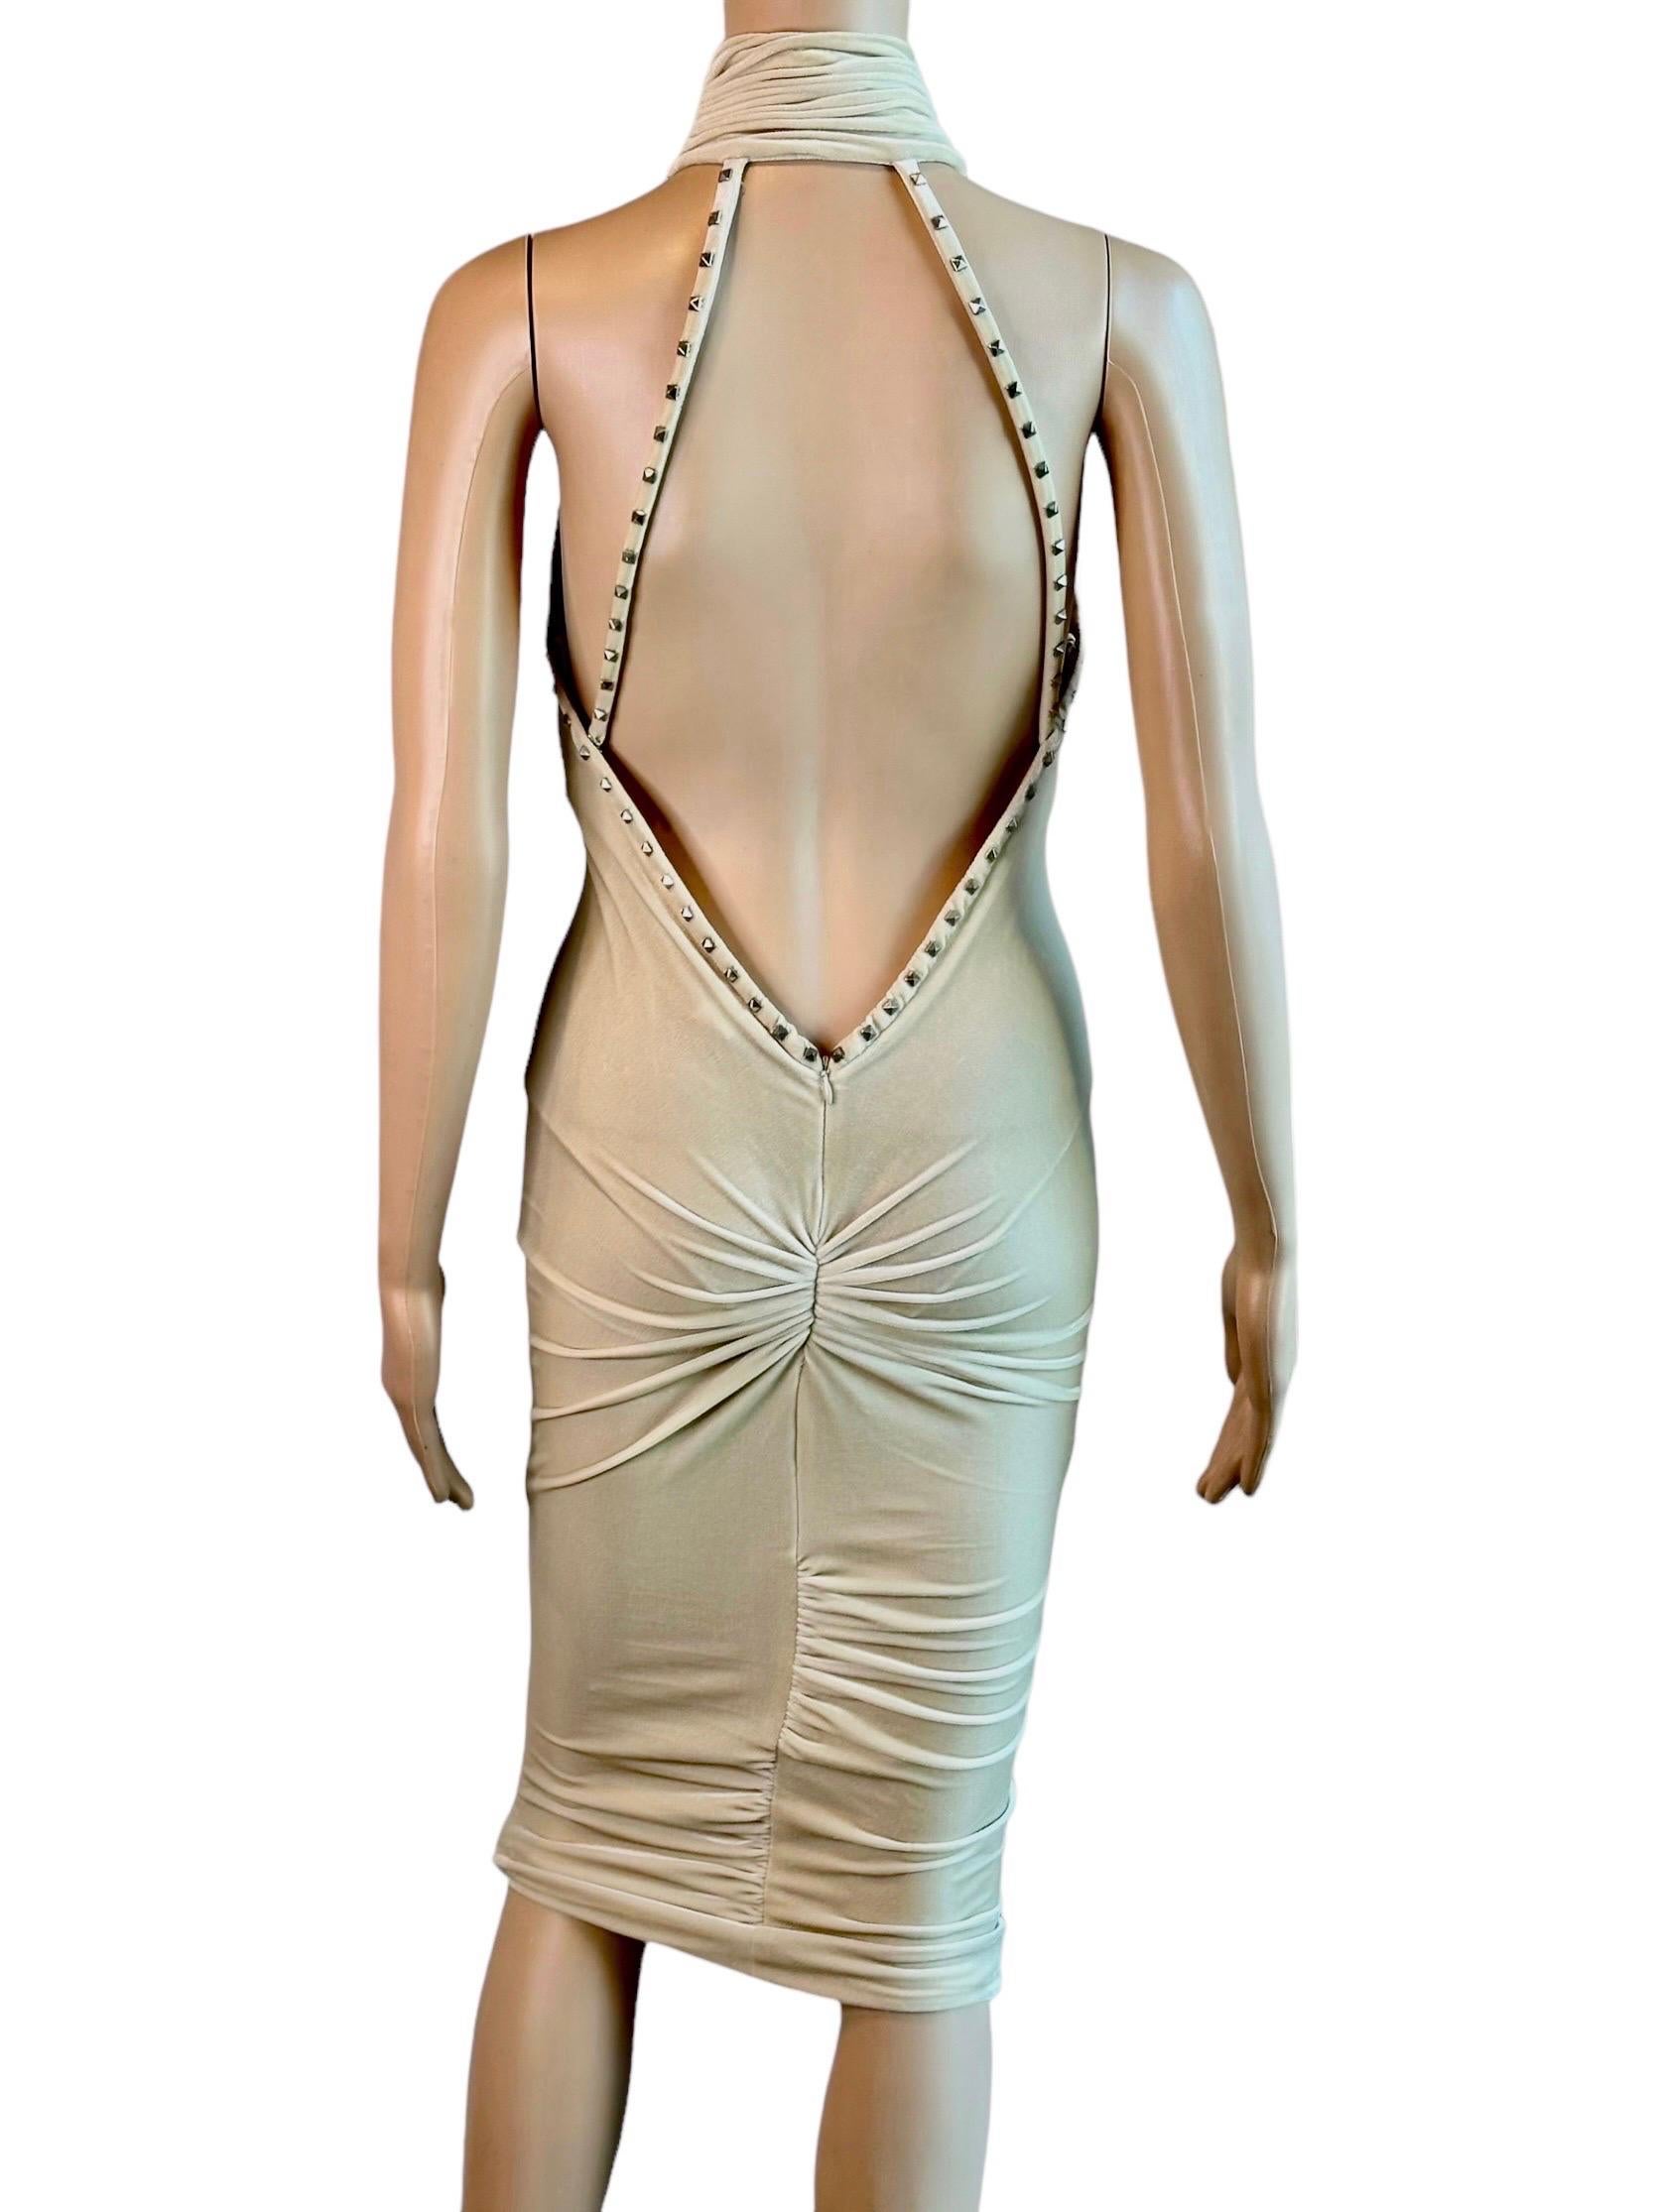 Versace F/W 2004 Runway Plunging Keyhole Cutout Back Studded Detail Dress For Sale 4